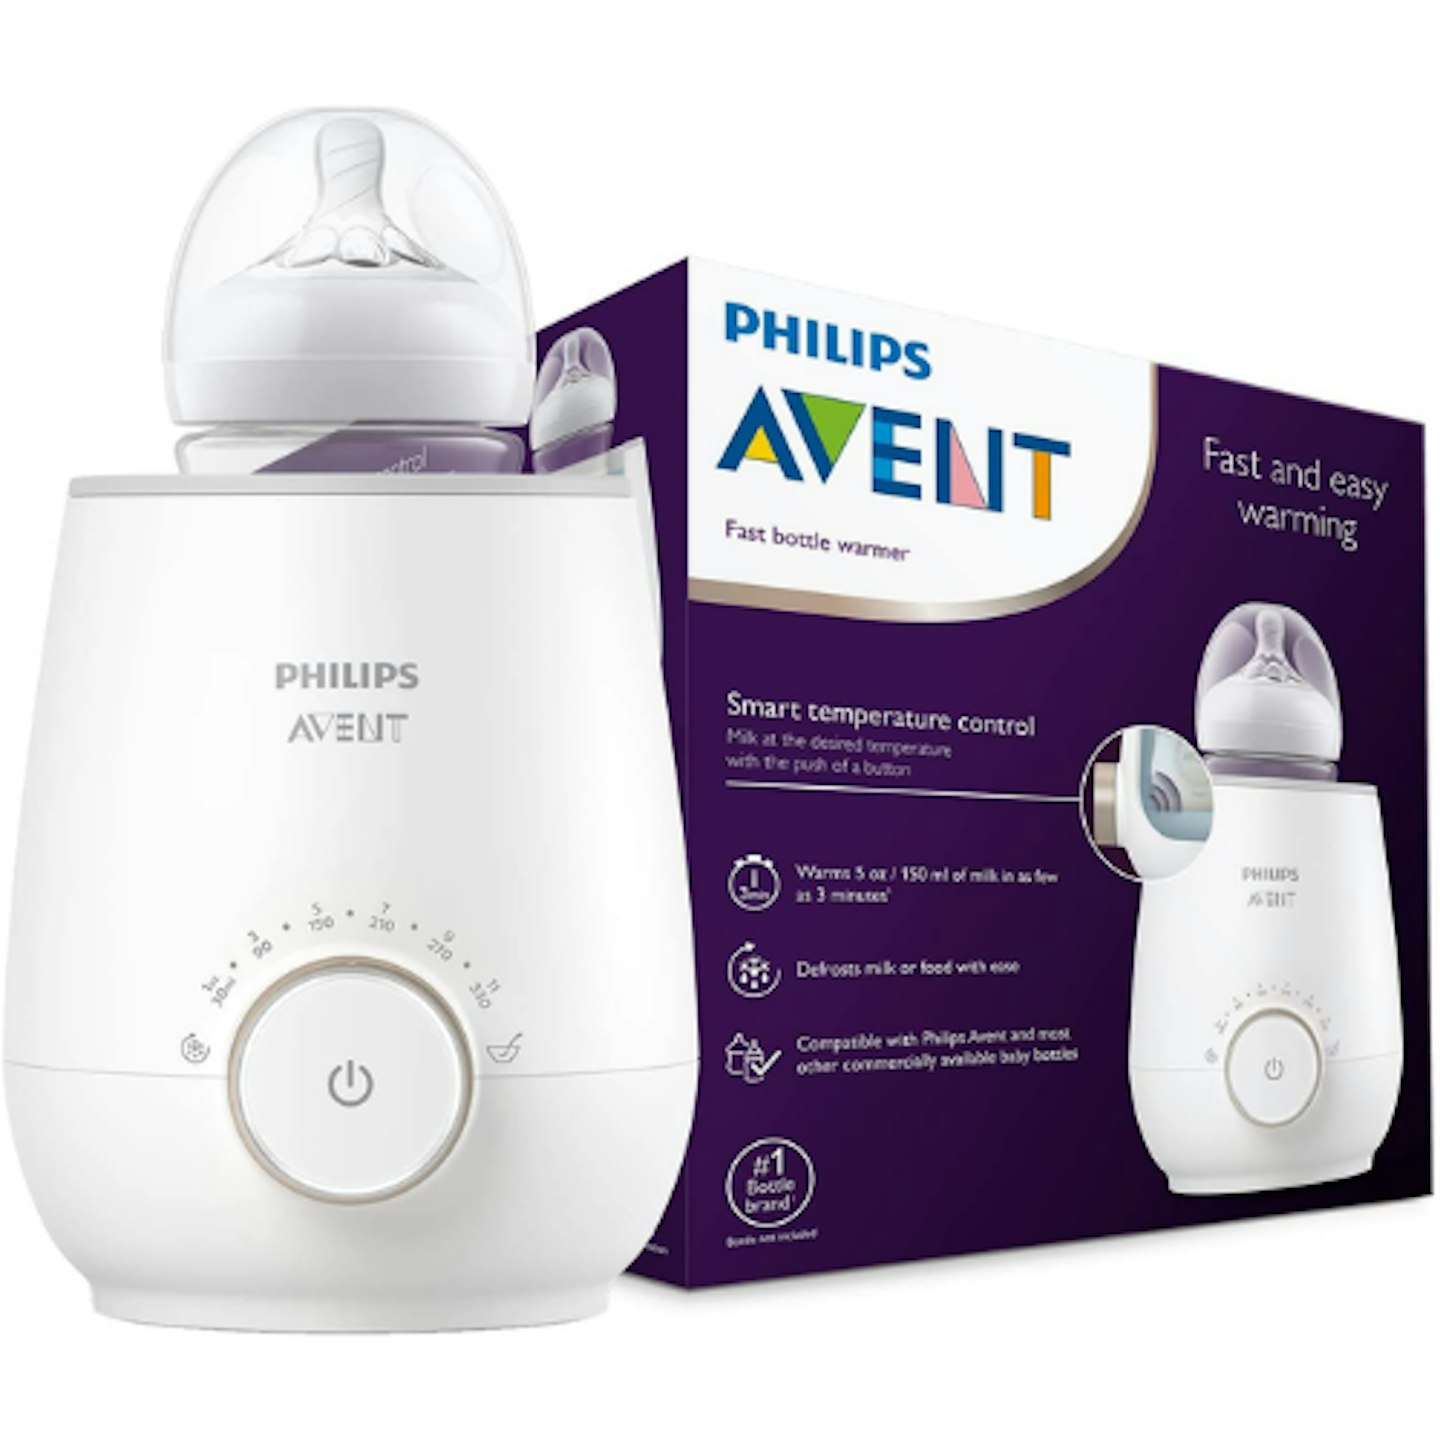 Philips Avent Fast Bottle Warmer with Smart Temperature Control